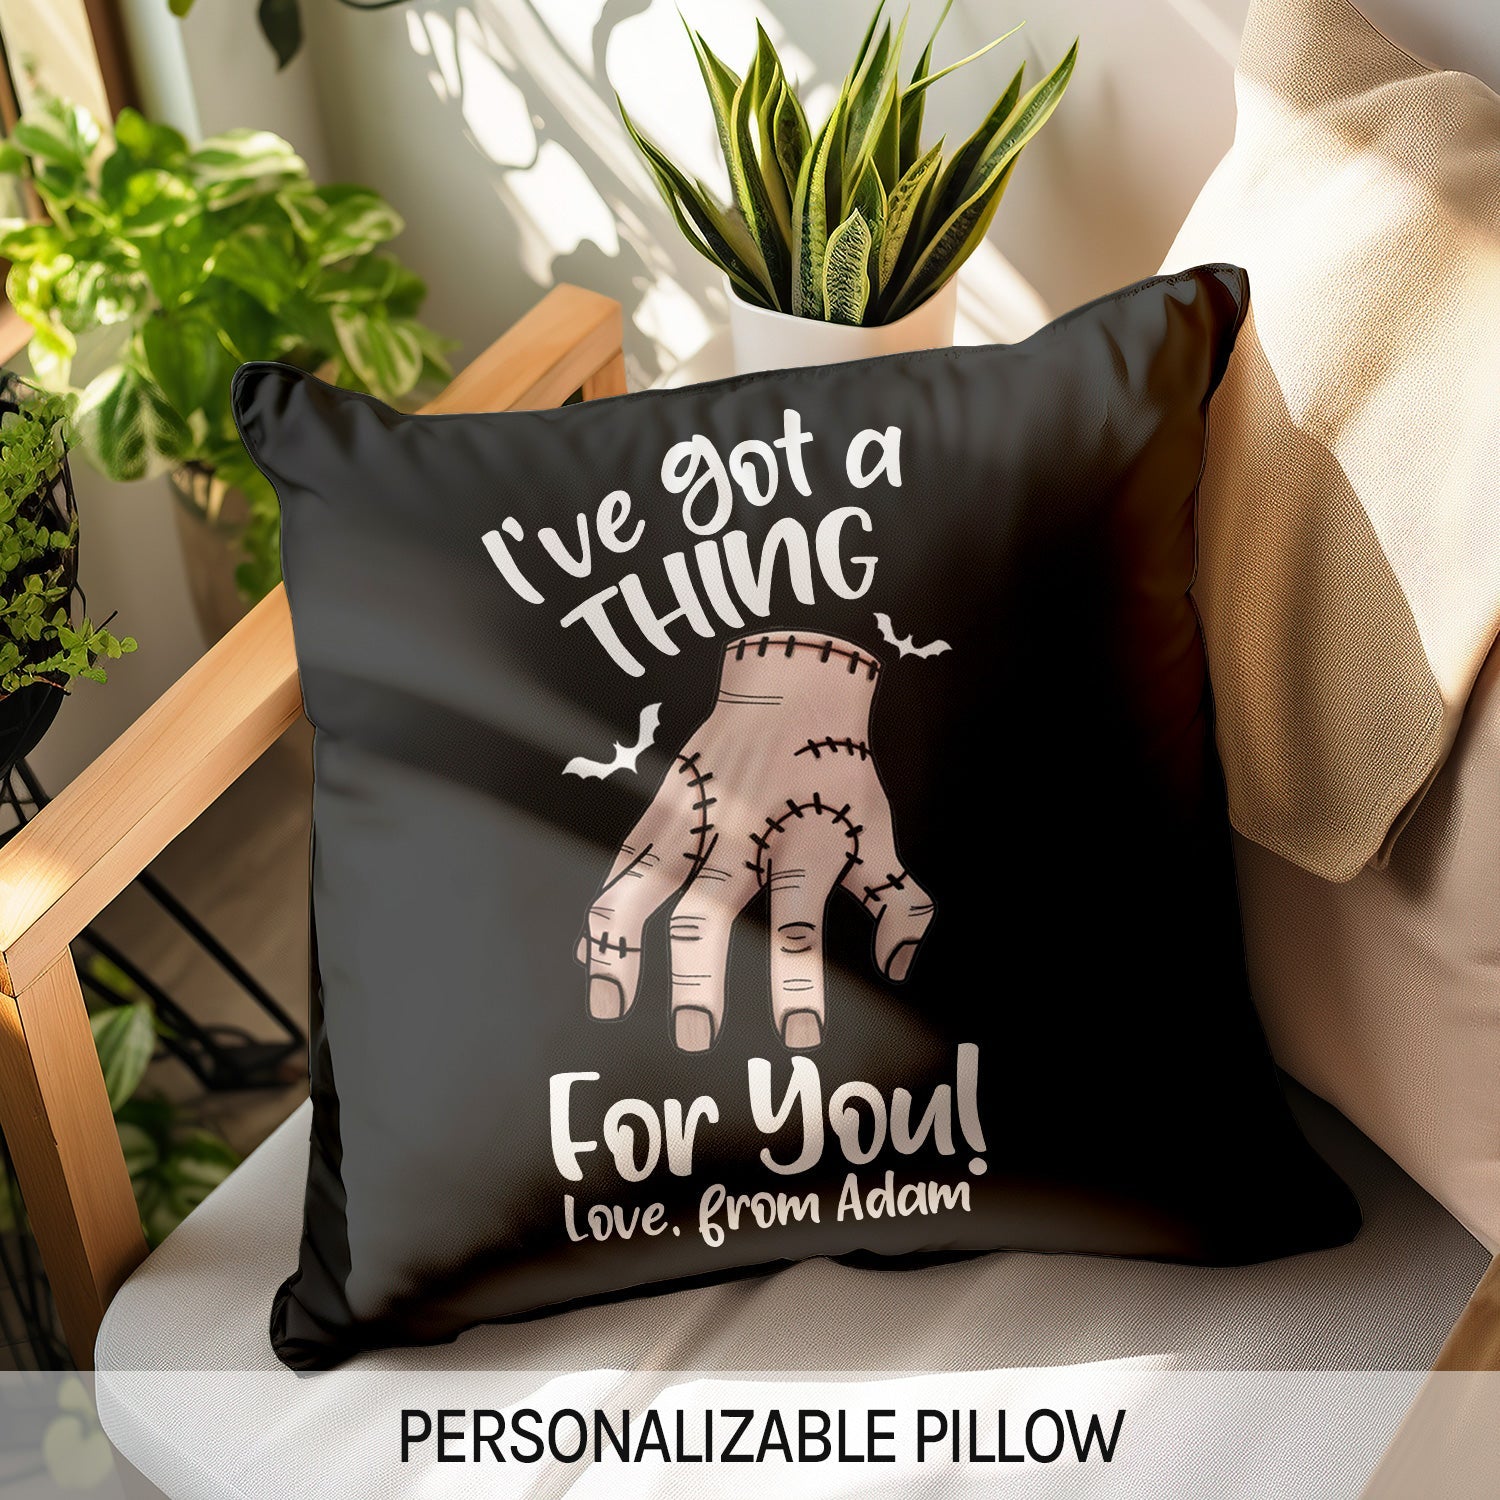 I've Got A Thing For You - Personalized Anniversary or Halloween gift for Boyfriend or Girlfriend - Custom Pillow - MyMindfulGifts